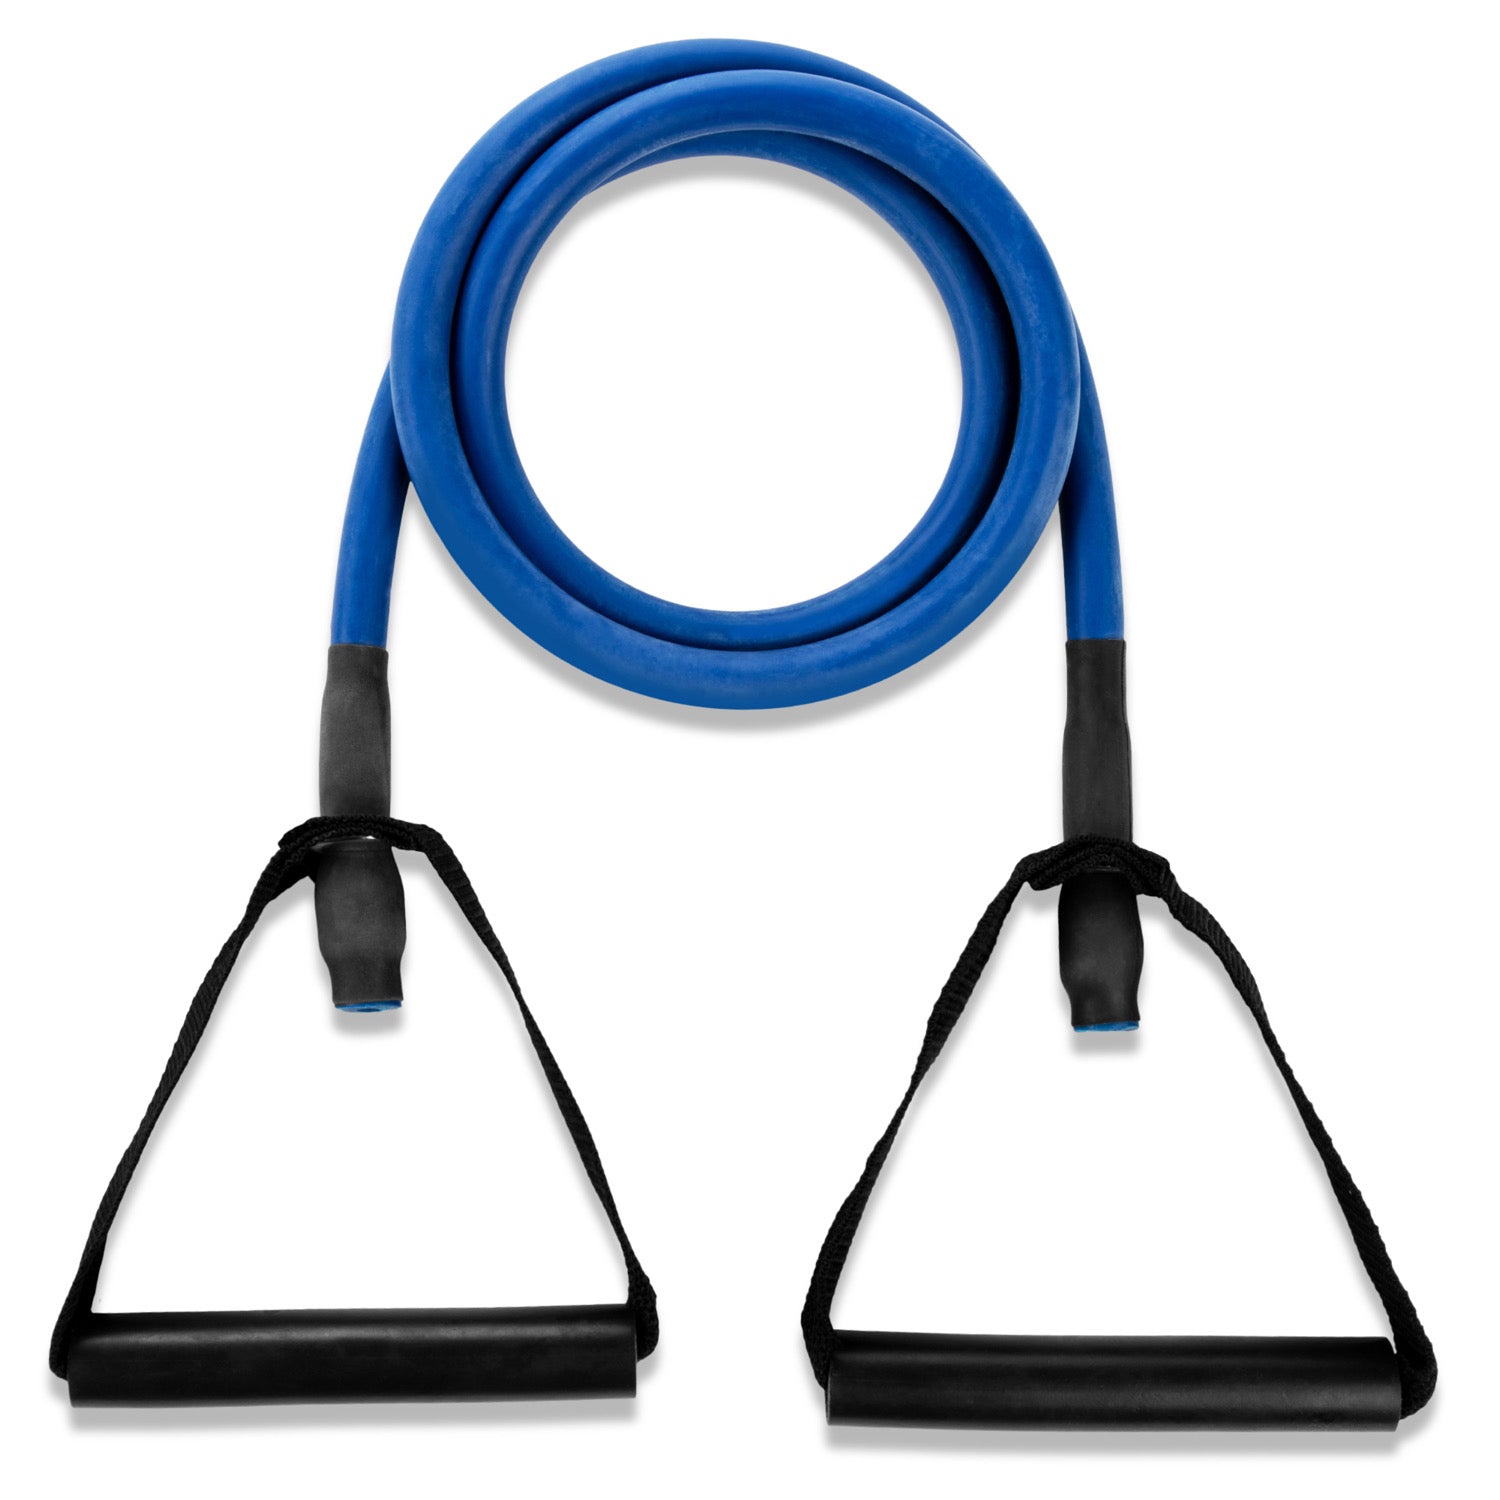 XP Resistance Tubing with PVC Handles Series Heavy / Blue RHINO Fitness __label:NEW! fitness physical therapy resistance Training tubing